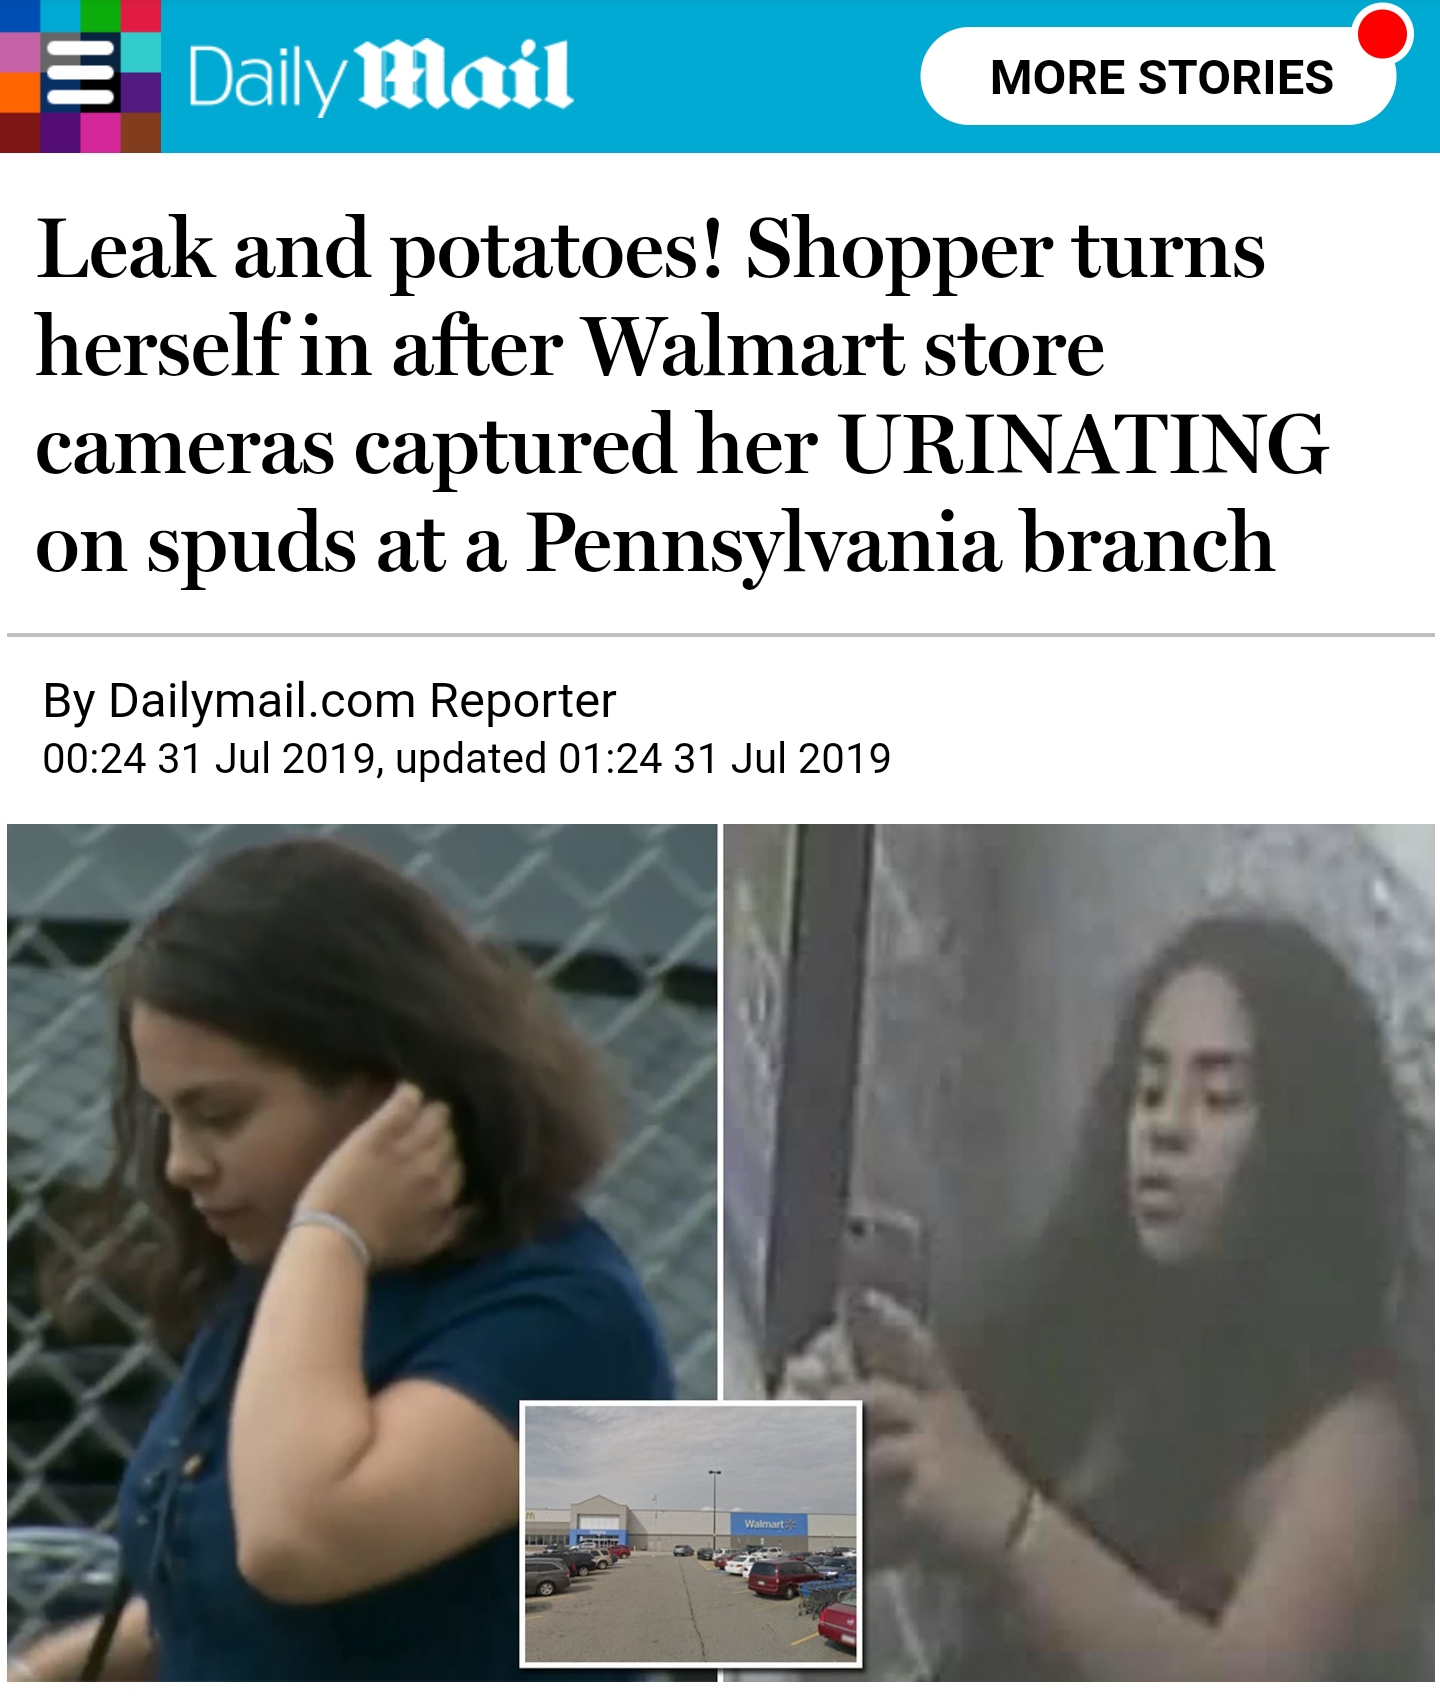 video - Daily Mail More Stories Leak and potatoes! Shopper turns herself in after Walmart store cameras captured her Urinating on spuds at a Pennsylvania branch By Dailymail.com Reporter , updated